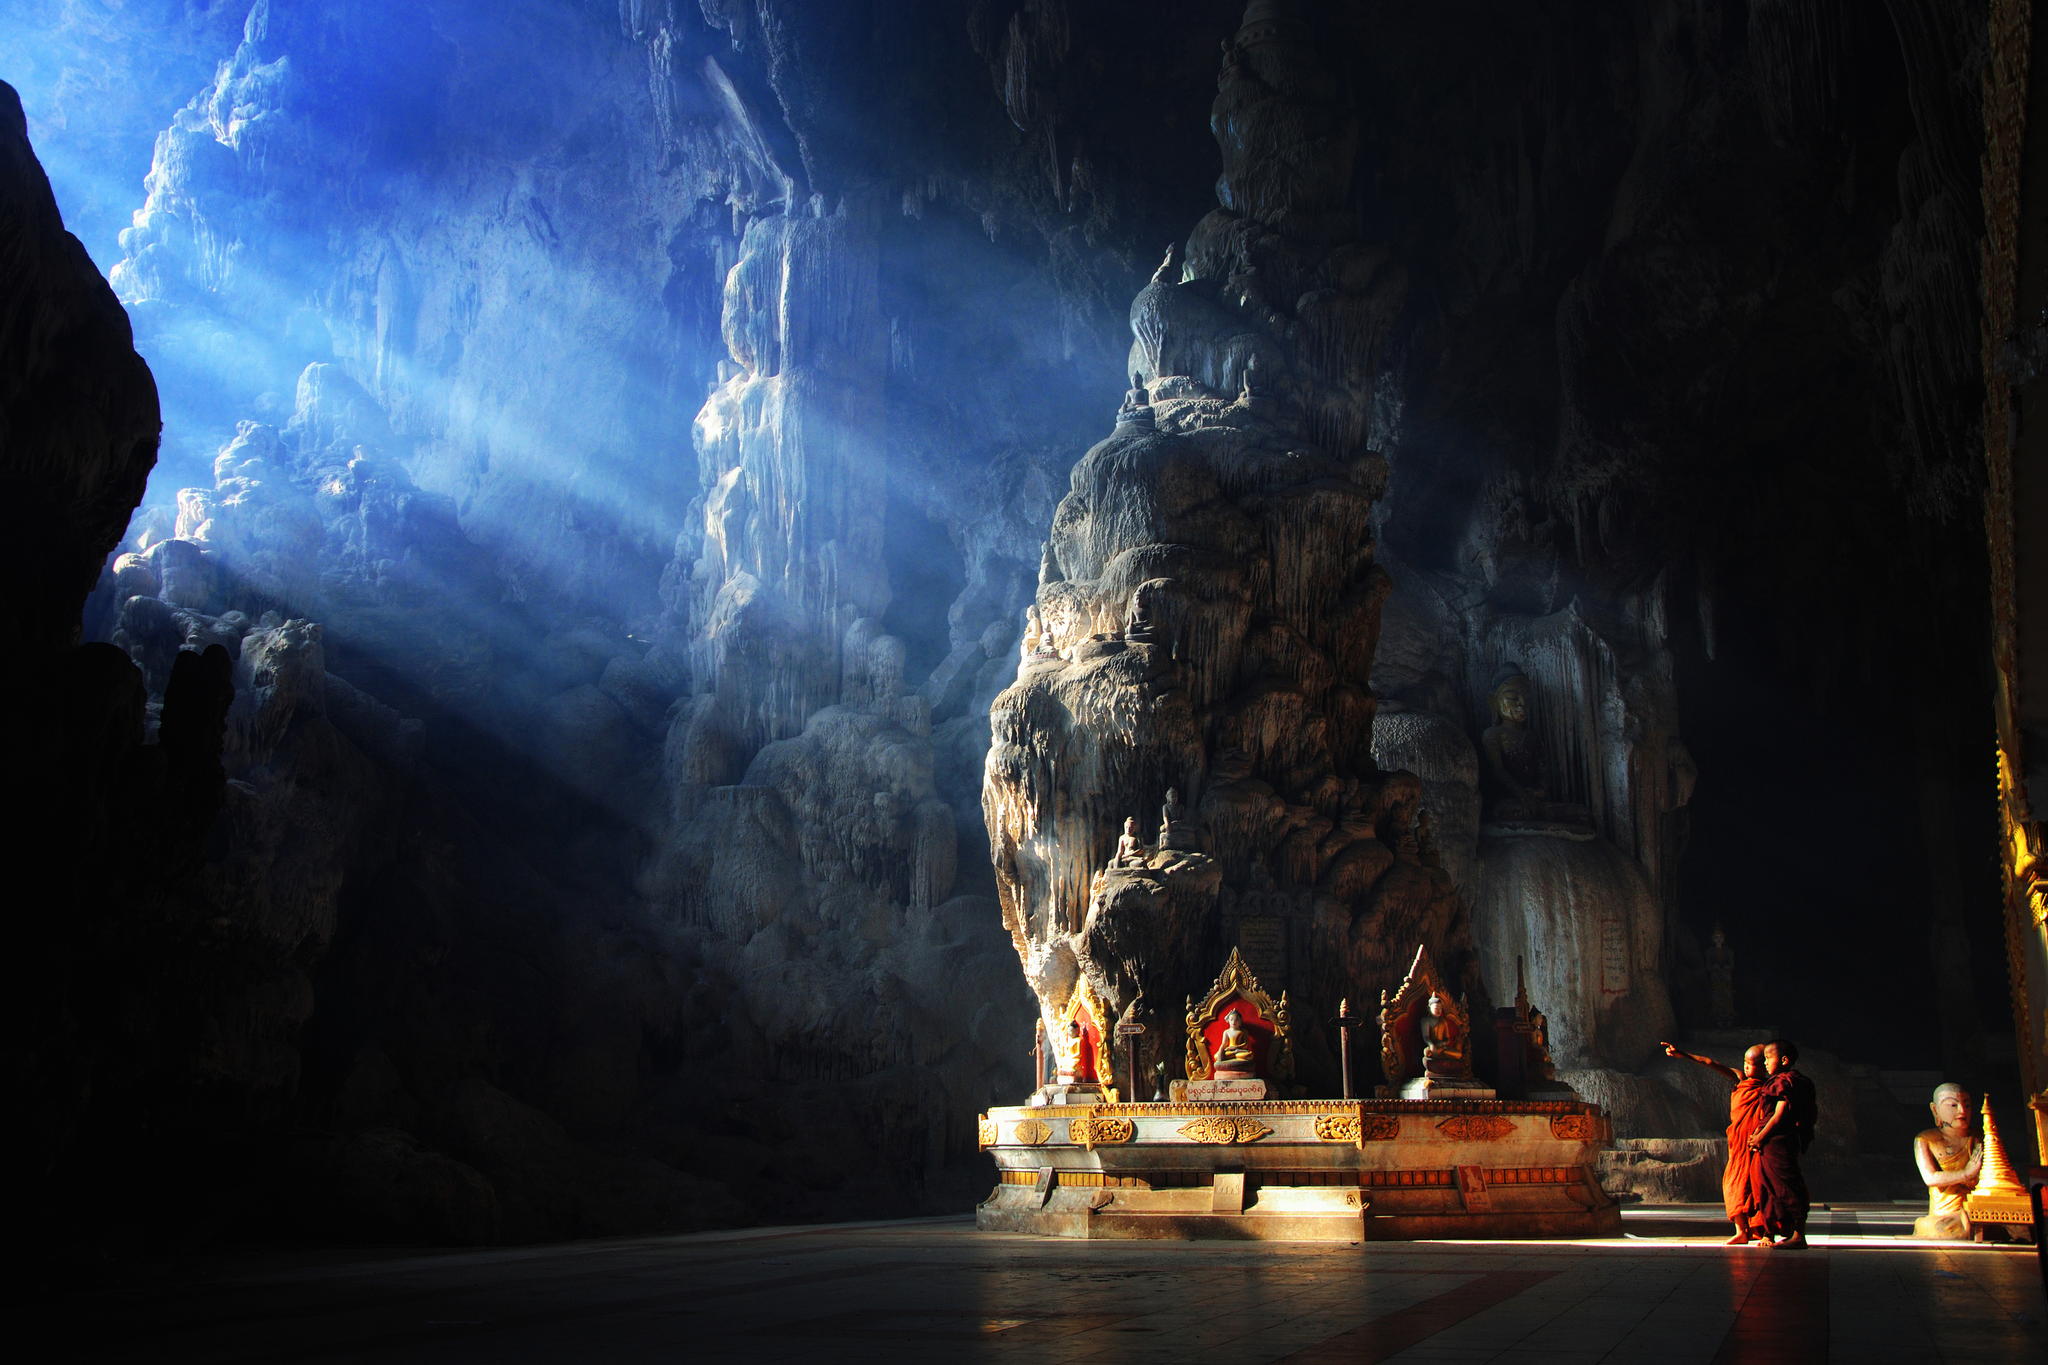 A Buddhist temple inside a cave